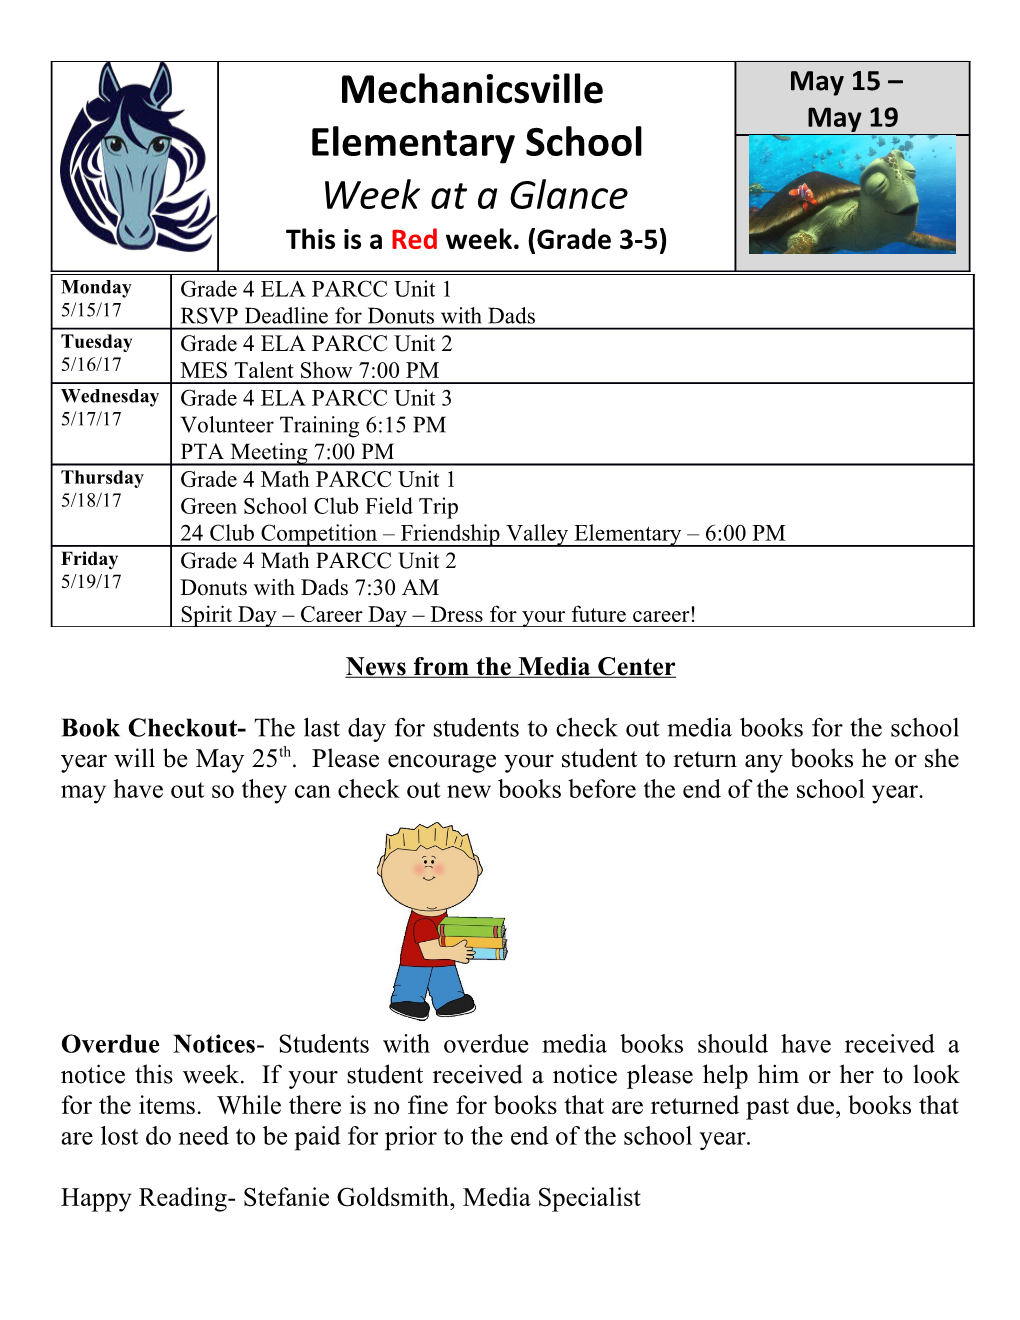 News from the Media Center